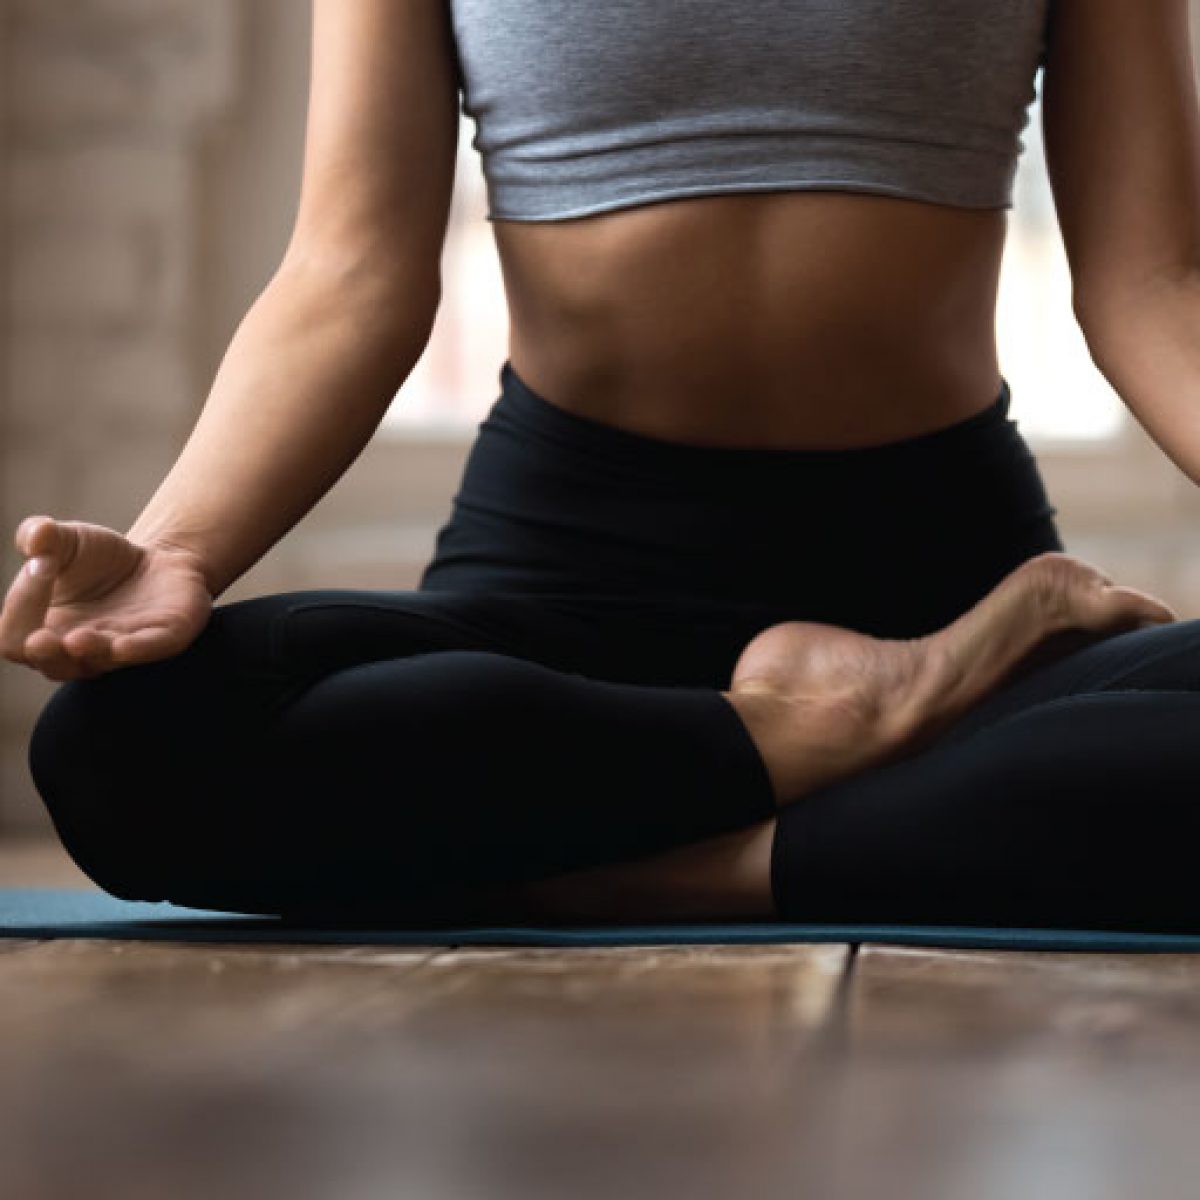 Yoga for Digestion: Poses, Benefits, and More